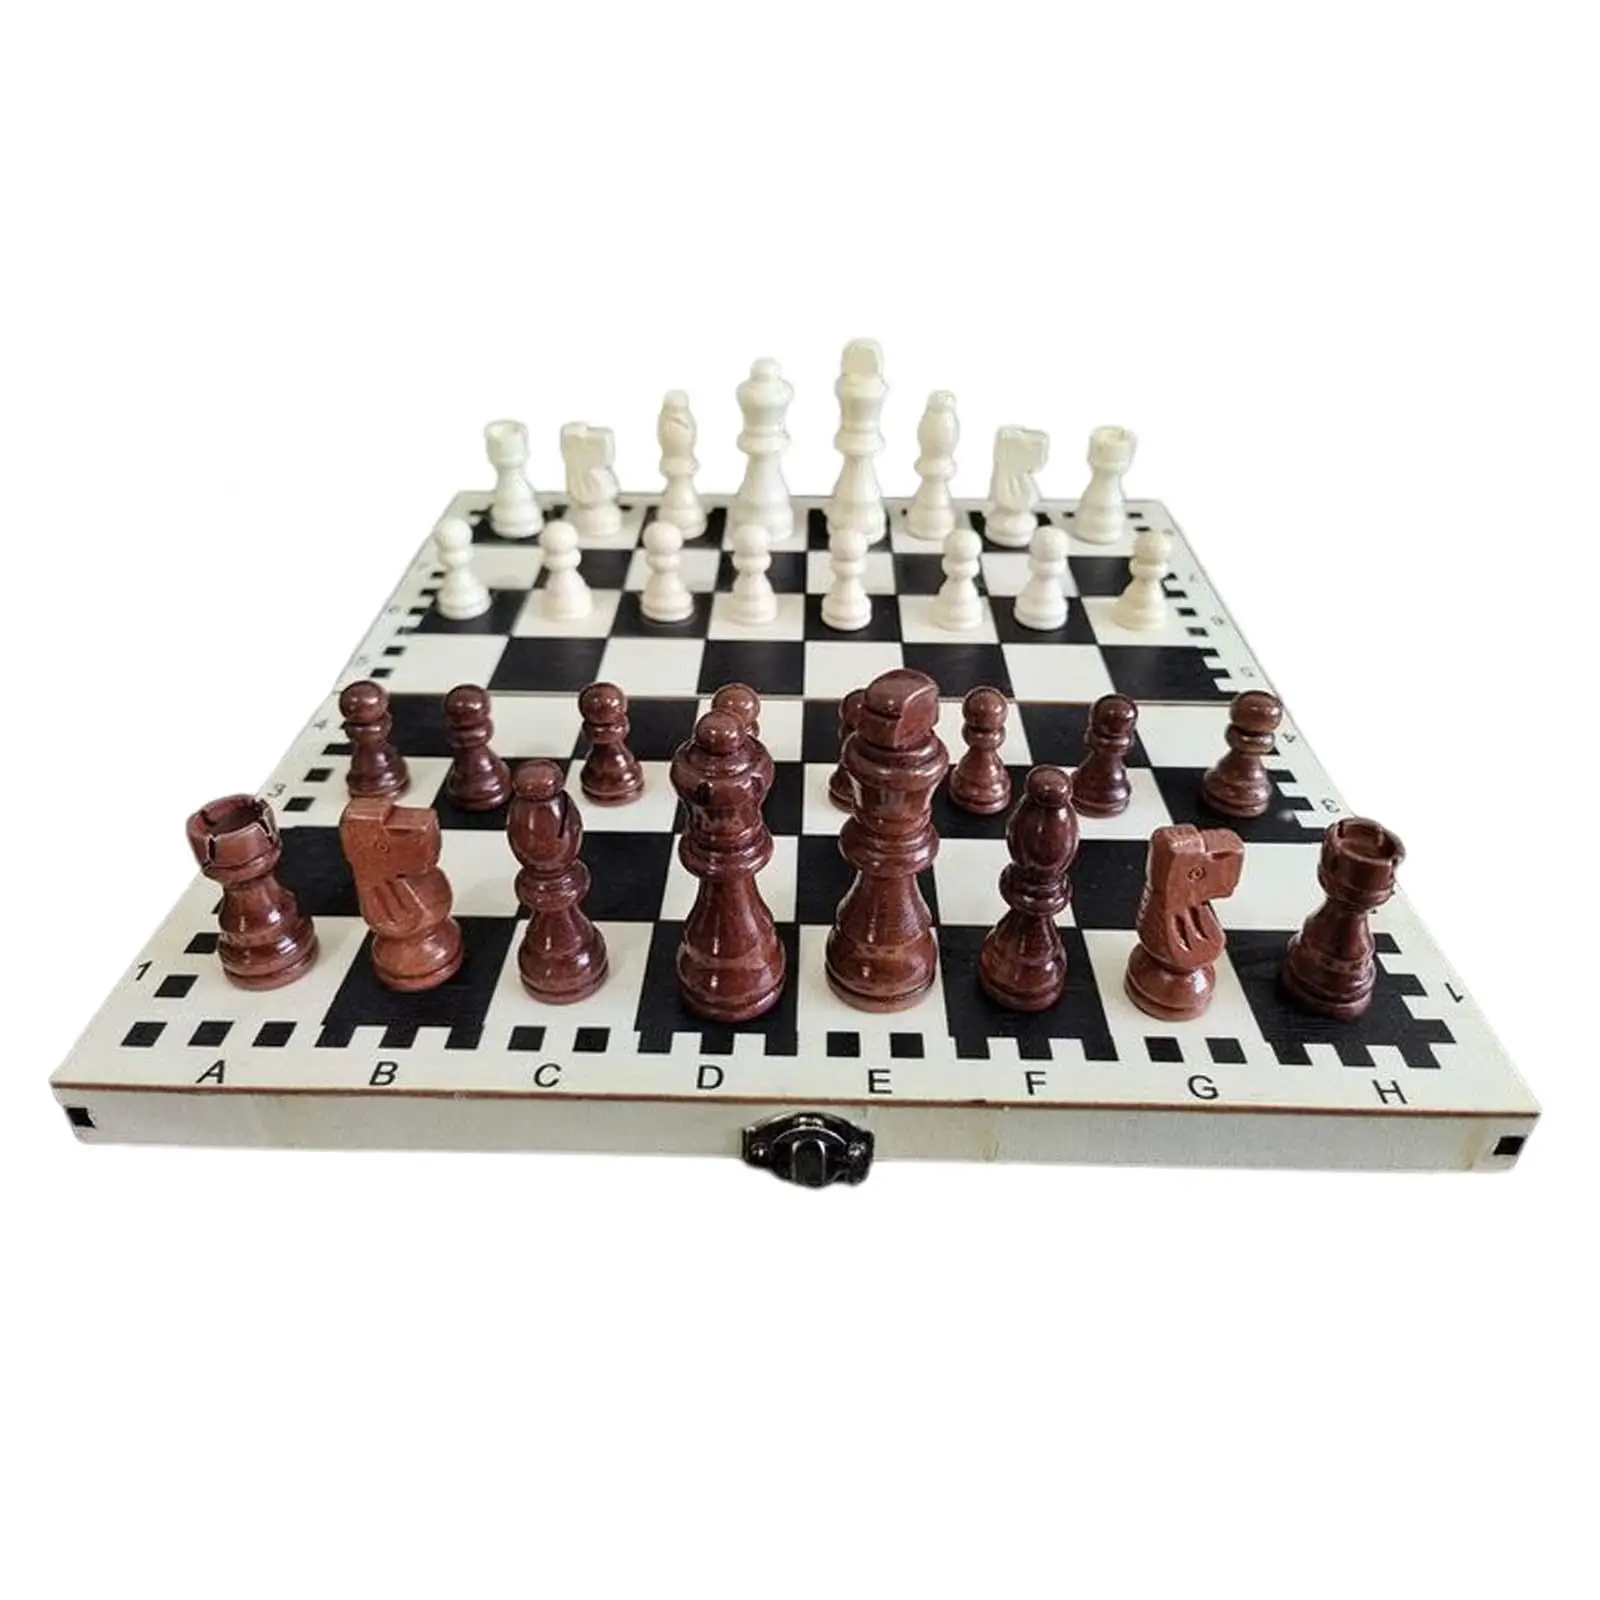 Wooden Folding Board Chess Set 30x30cm Handmade Entertainment Tool Accessories for Travelling Game Play